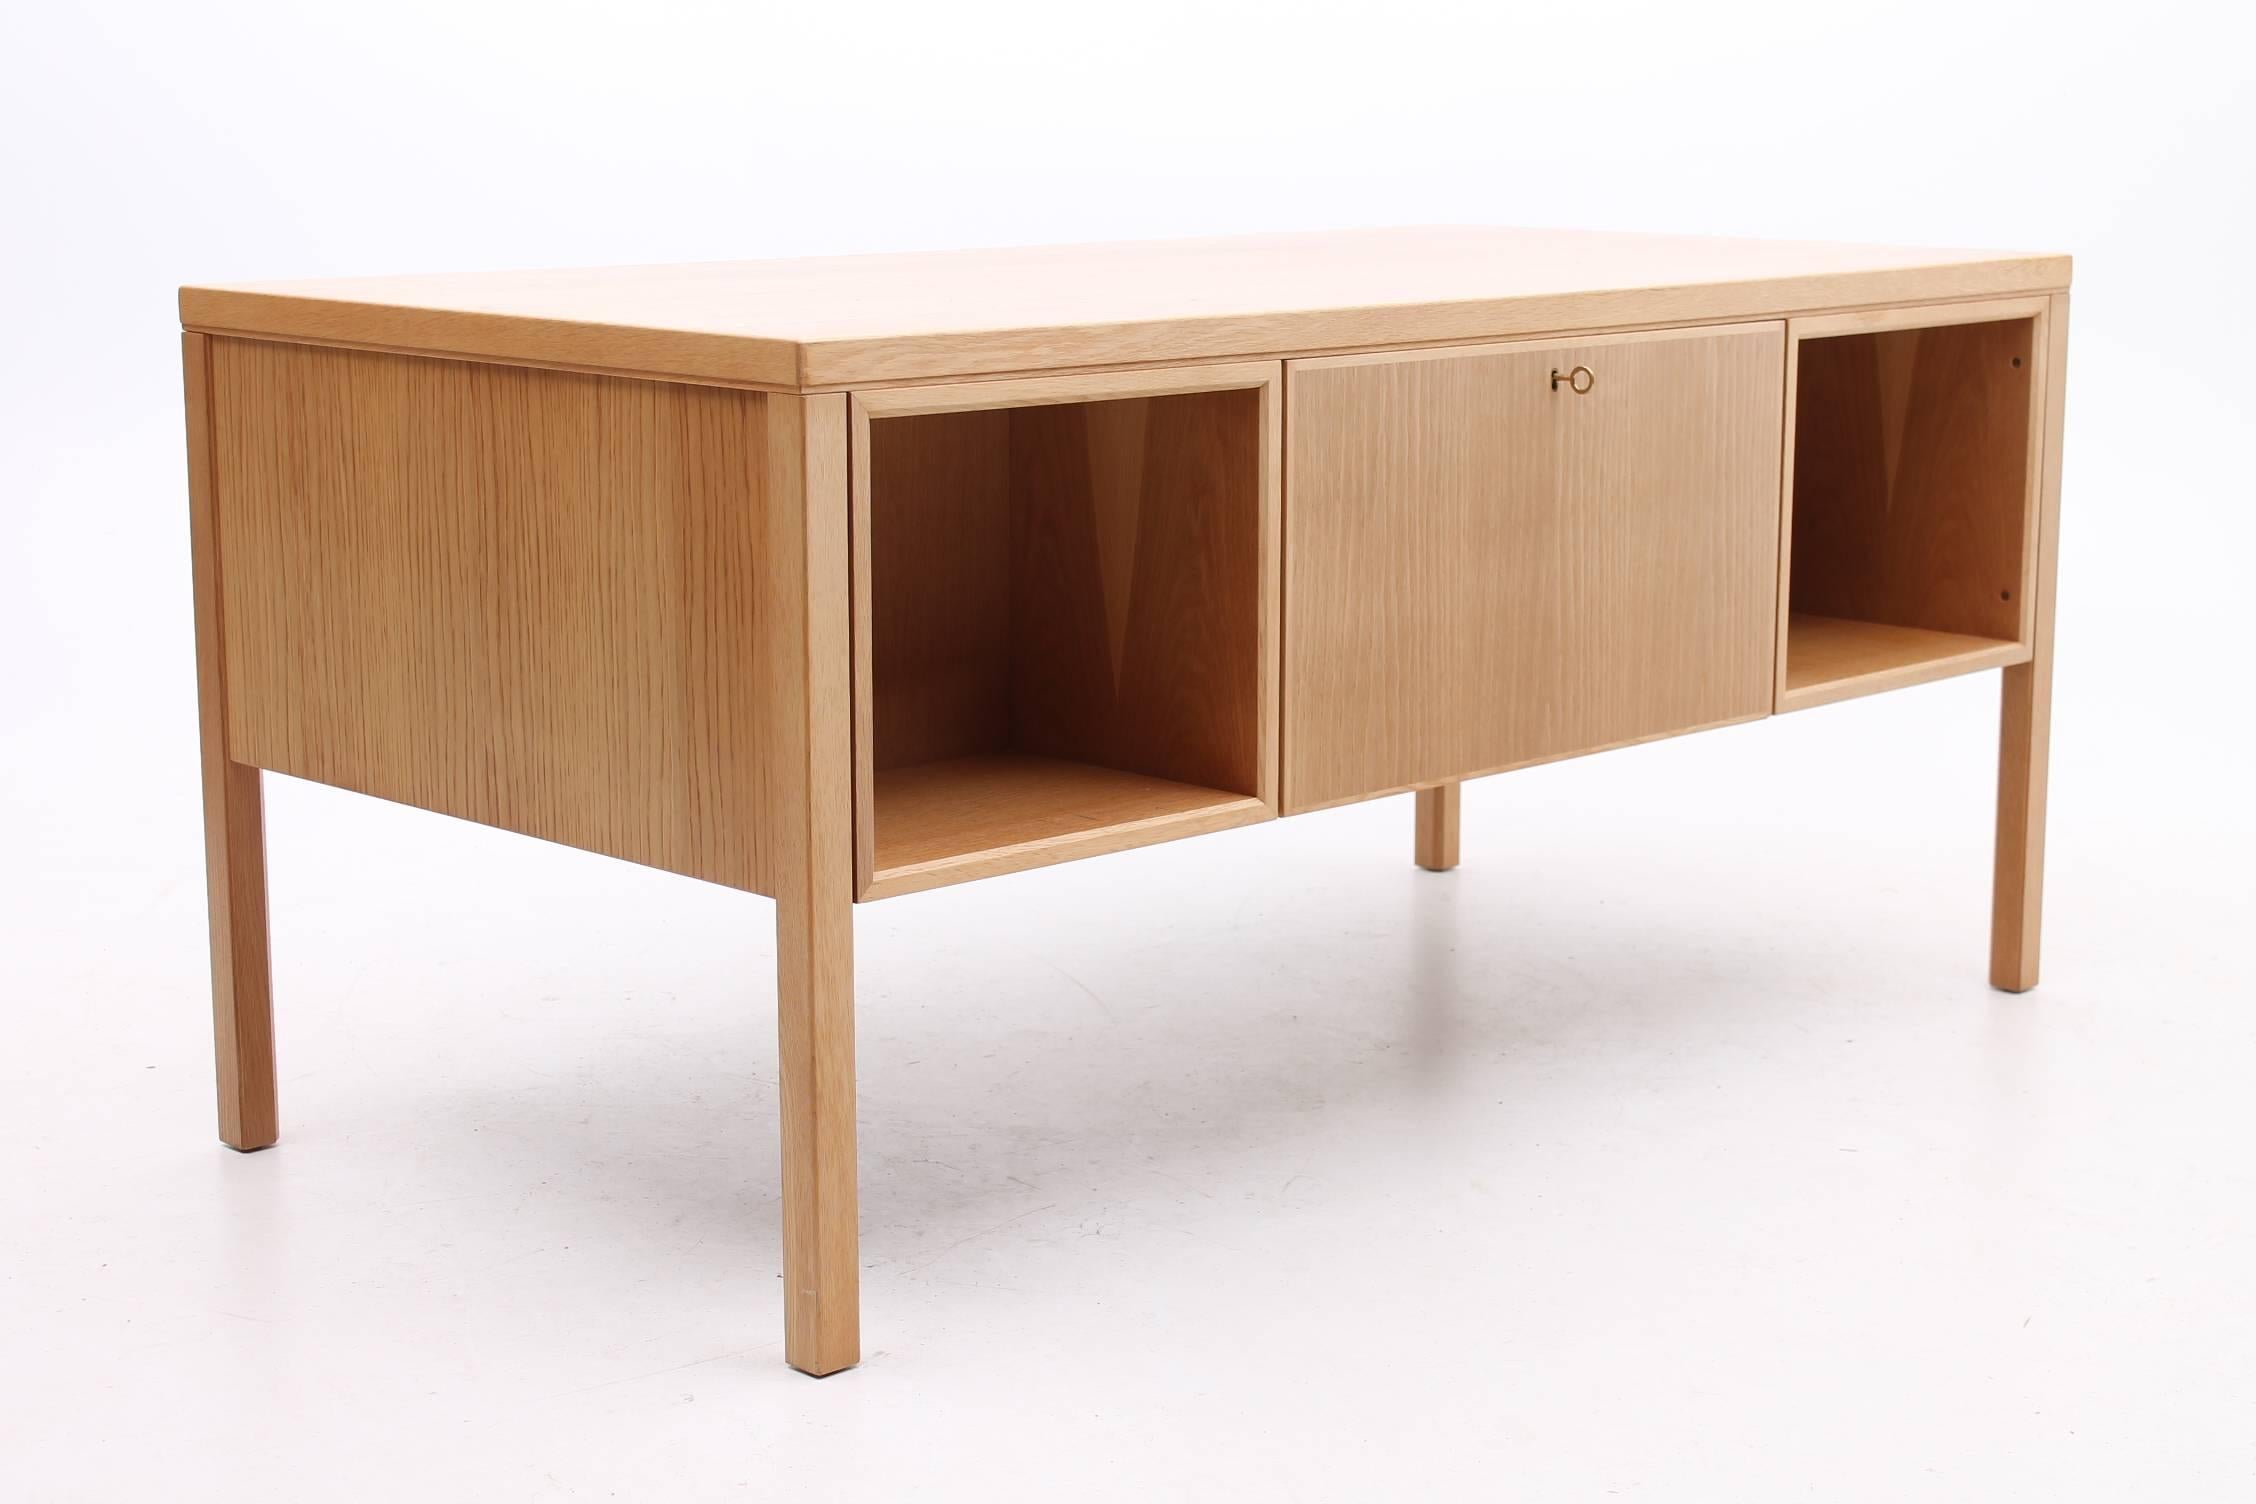 Oak desk designed by Gunni Omann for Omann Jun Møbelfabrik. The oak on the desk is a light straw color and is in excellent condition. The desk features three drawers on either side of the chair opening and the top two drawers on either side lock.